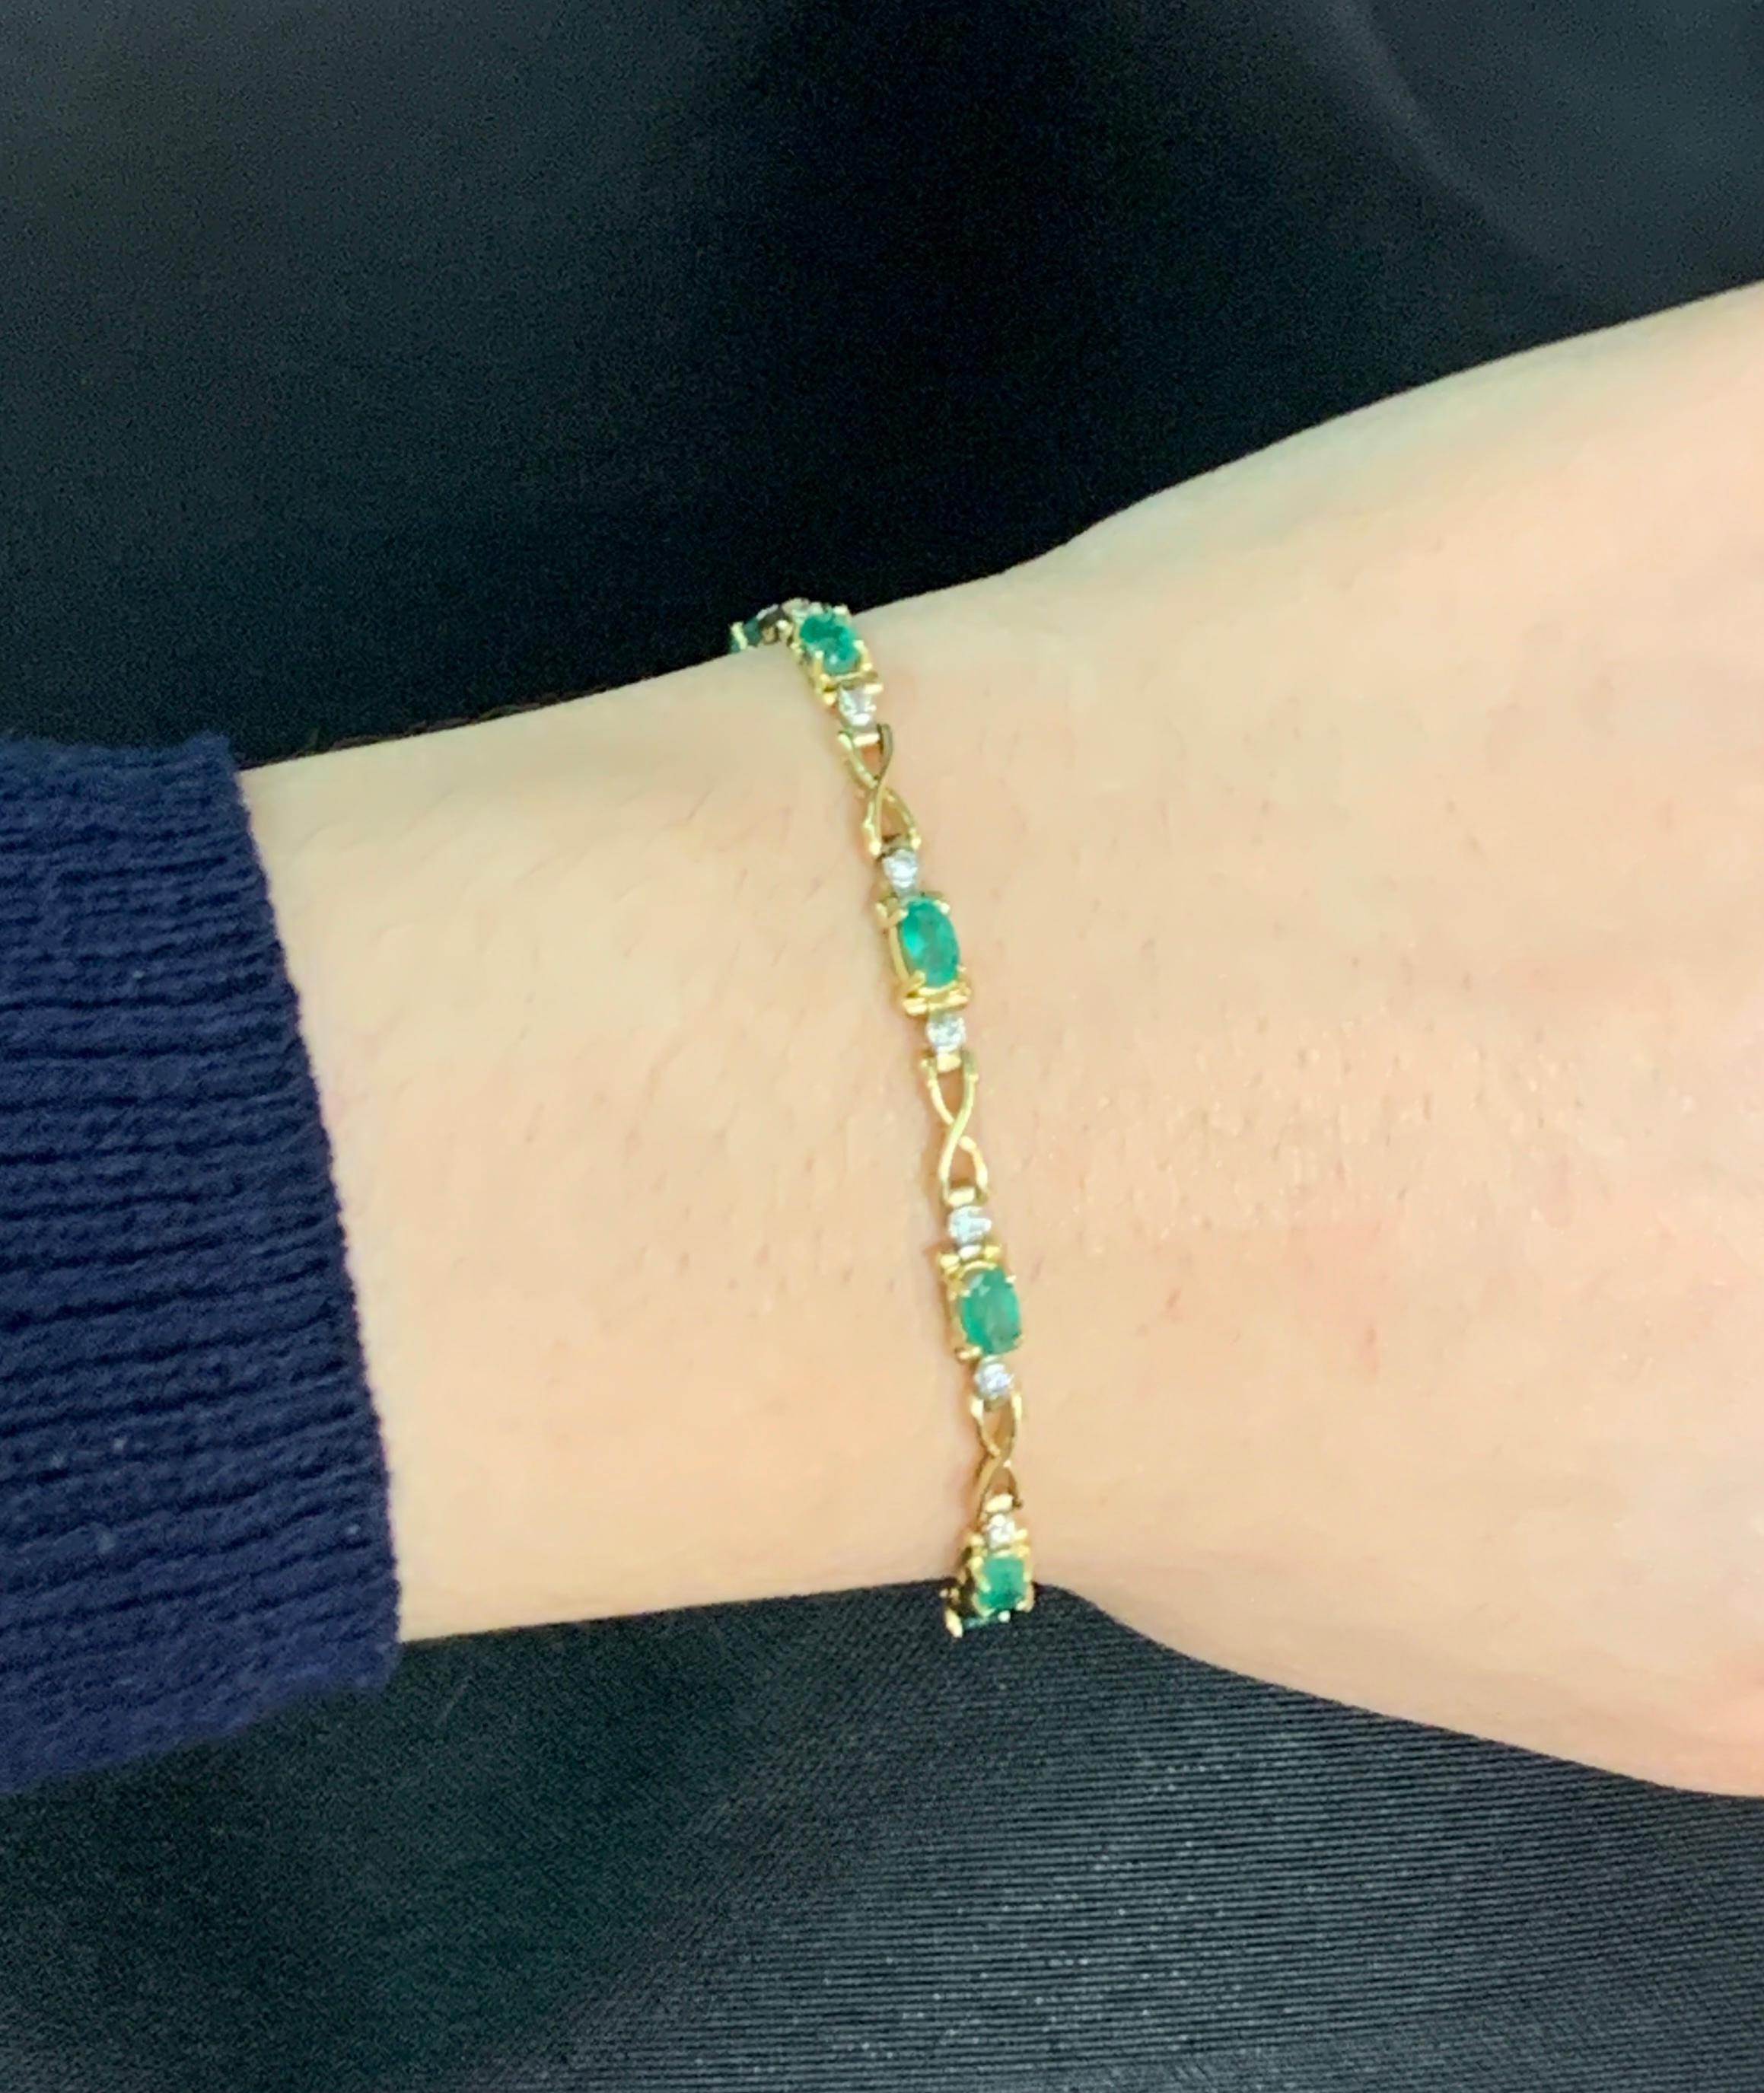 Emerald and Diamond Link Bracelet

Yellow gold link bracelet set with 10 oval cut emeralds and 19 round cut diamonds. 

Approximate Emerald Weights: 1.8 Carats
Approximate Diamond Weights: 0.76 Carats
Approximately measures 7